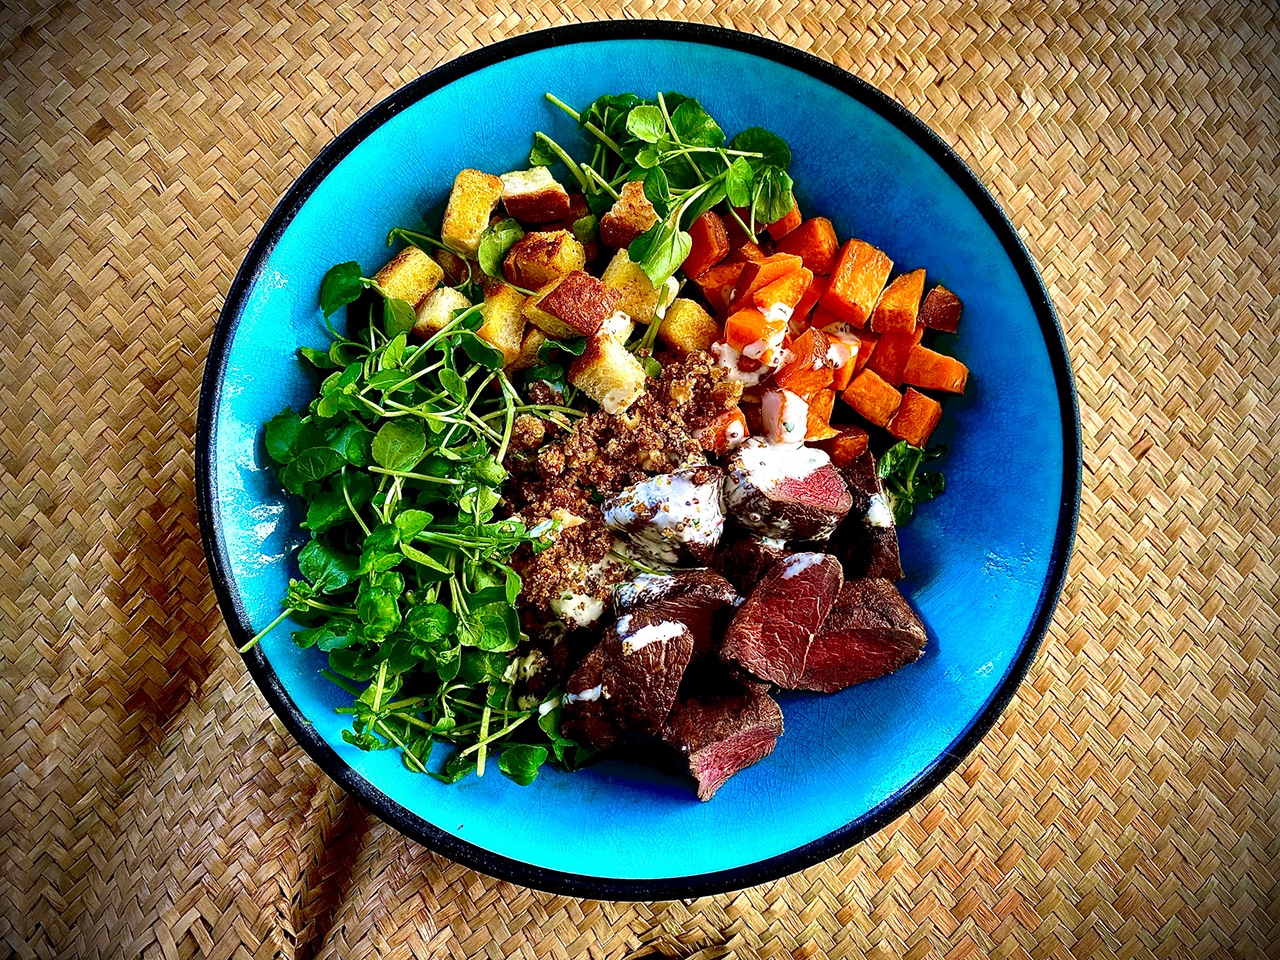 Venison Medallions and Watercress Salad with Rewena Croutons and Kawakawa Dressing